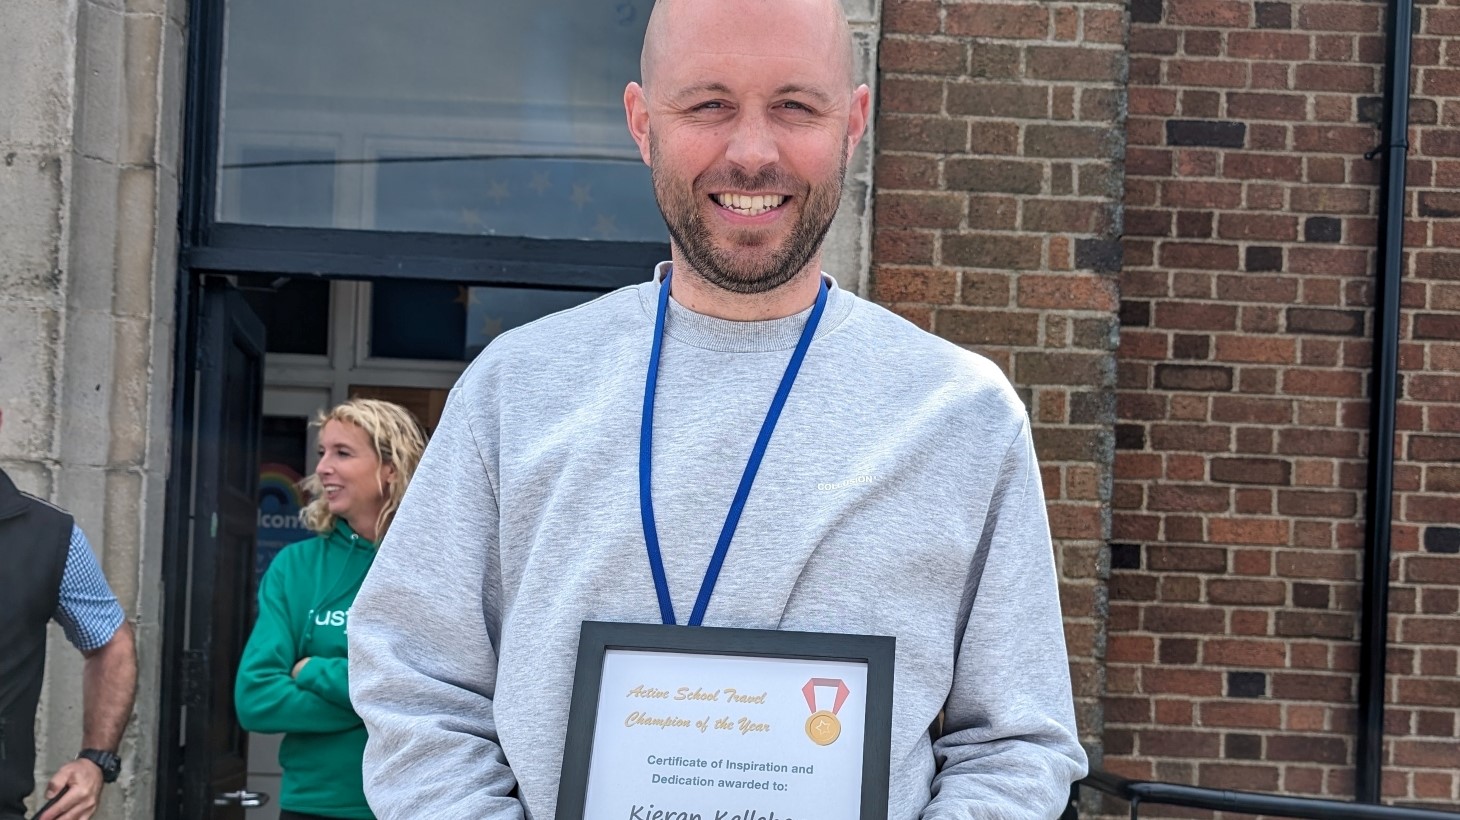 A man wearing a grey sweatshirt holds up a framed certificate while standing outside a school.